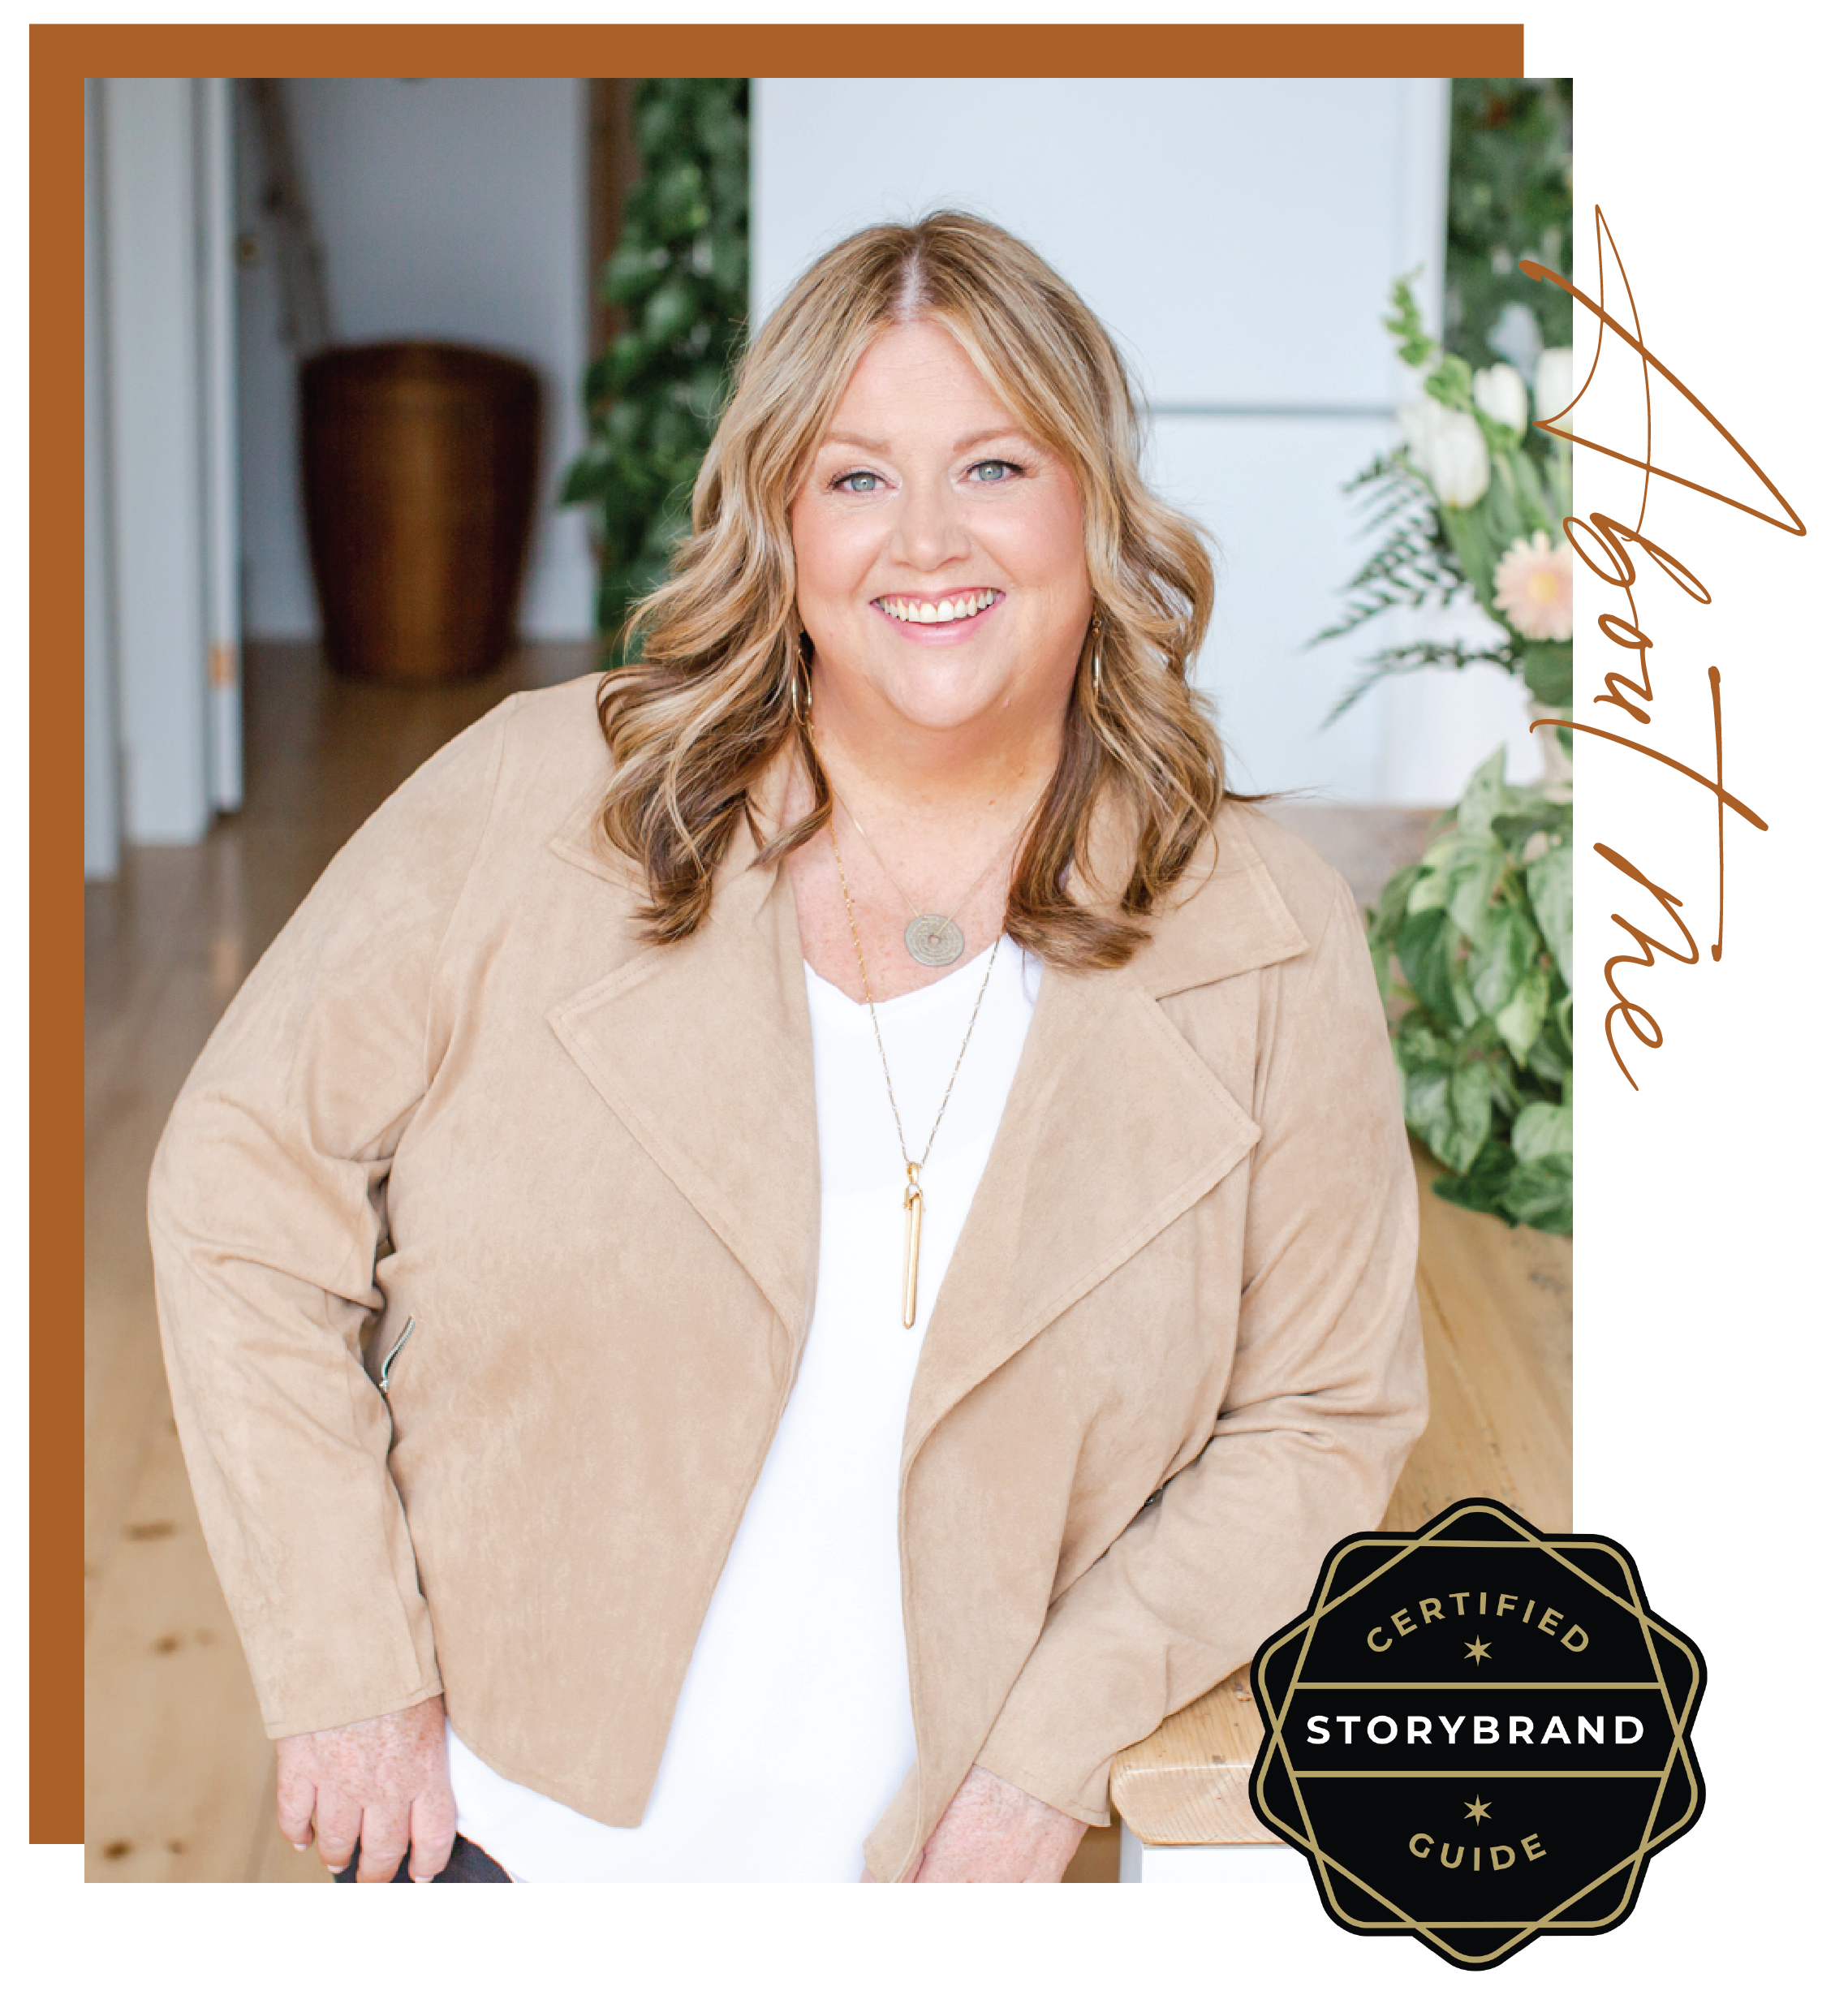 Meet Krista Smith, ActivateHerAwesome.com Your StoryBrand Certified Guide for Women Over 40